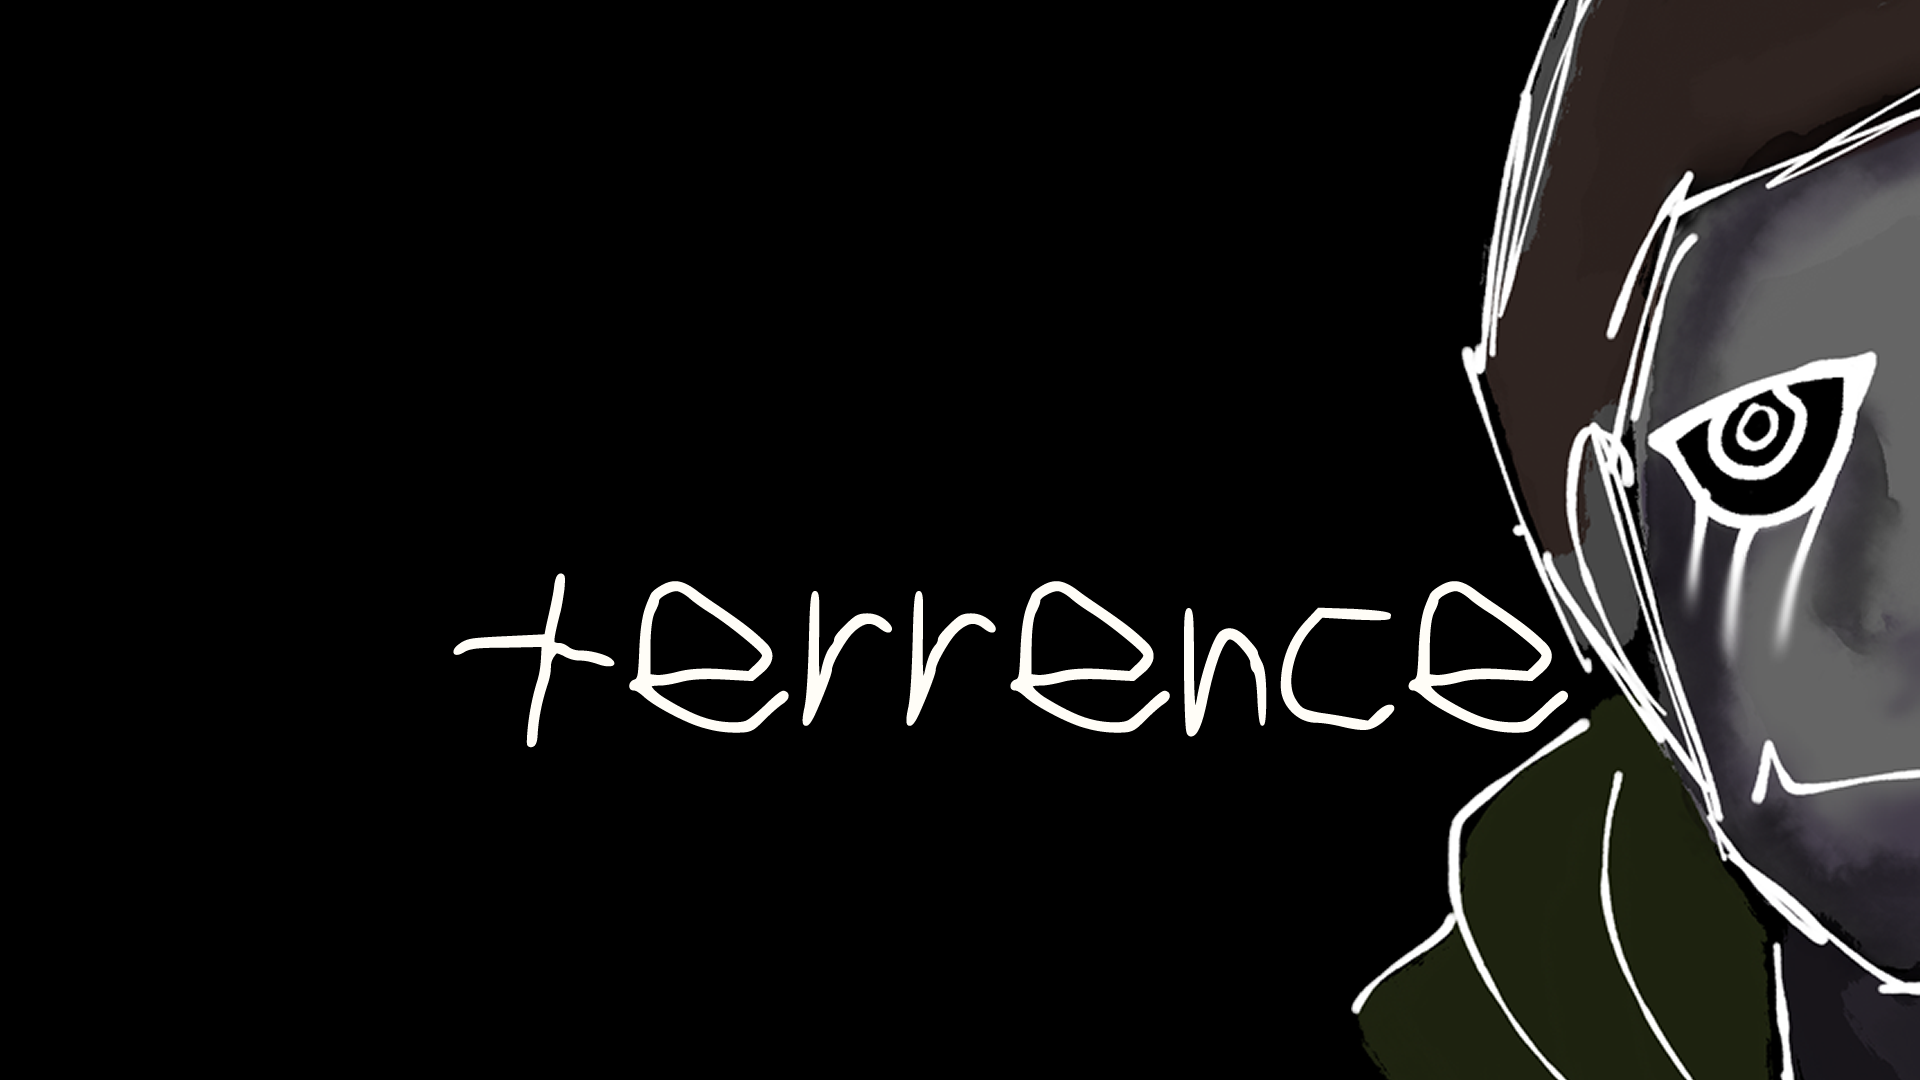 Terrence